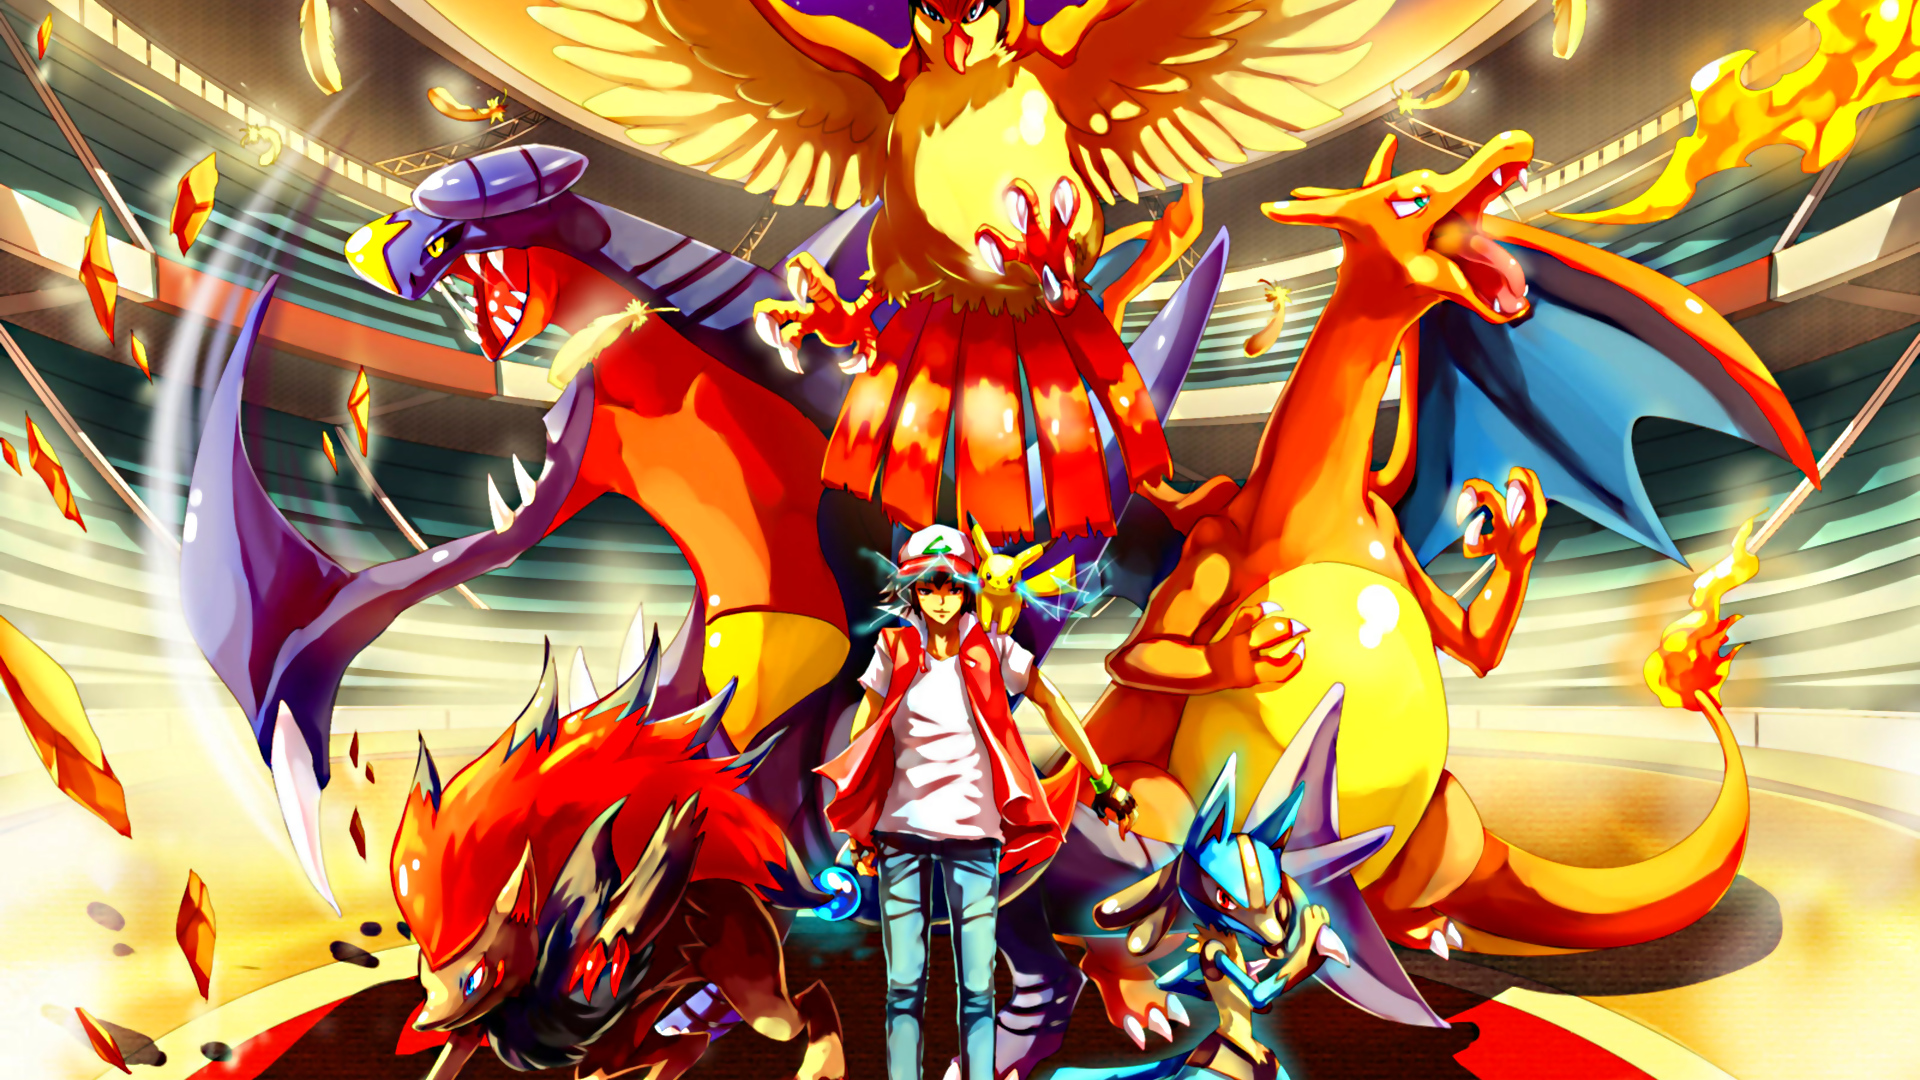 Free download New Pokemon Red Stadium HD Wallpaper [1920x1080] for your Desktop, Mobile & Tablet. Explore New Pokemon Wallpaper. Pikachu Wallpaper, Awesome Pokemon Wallpaper, Epic Pokemon Wallpaper